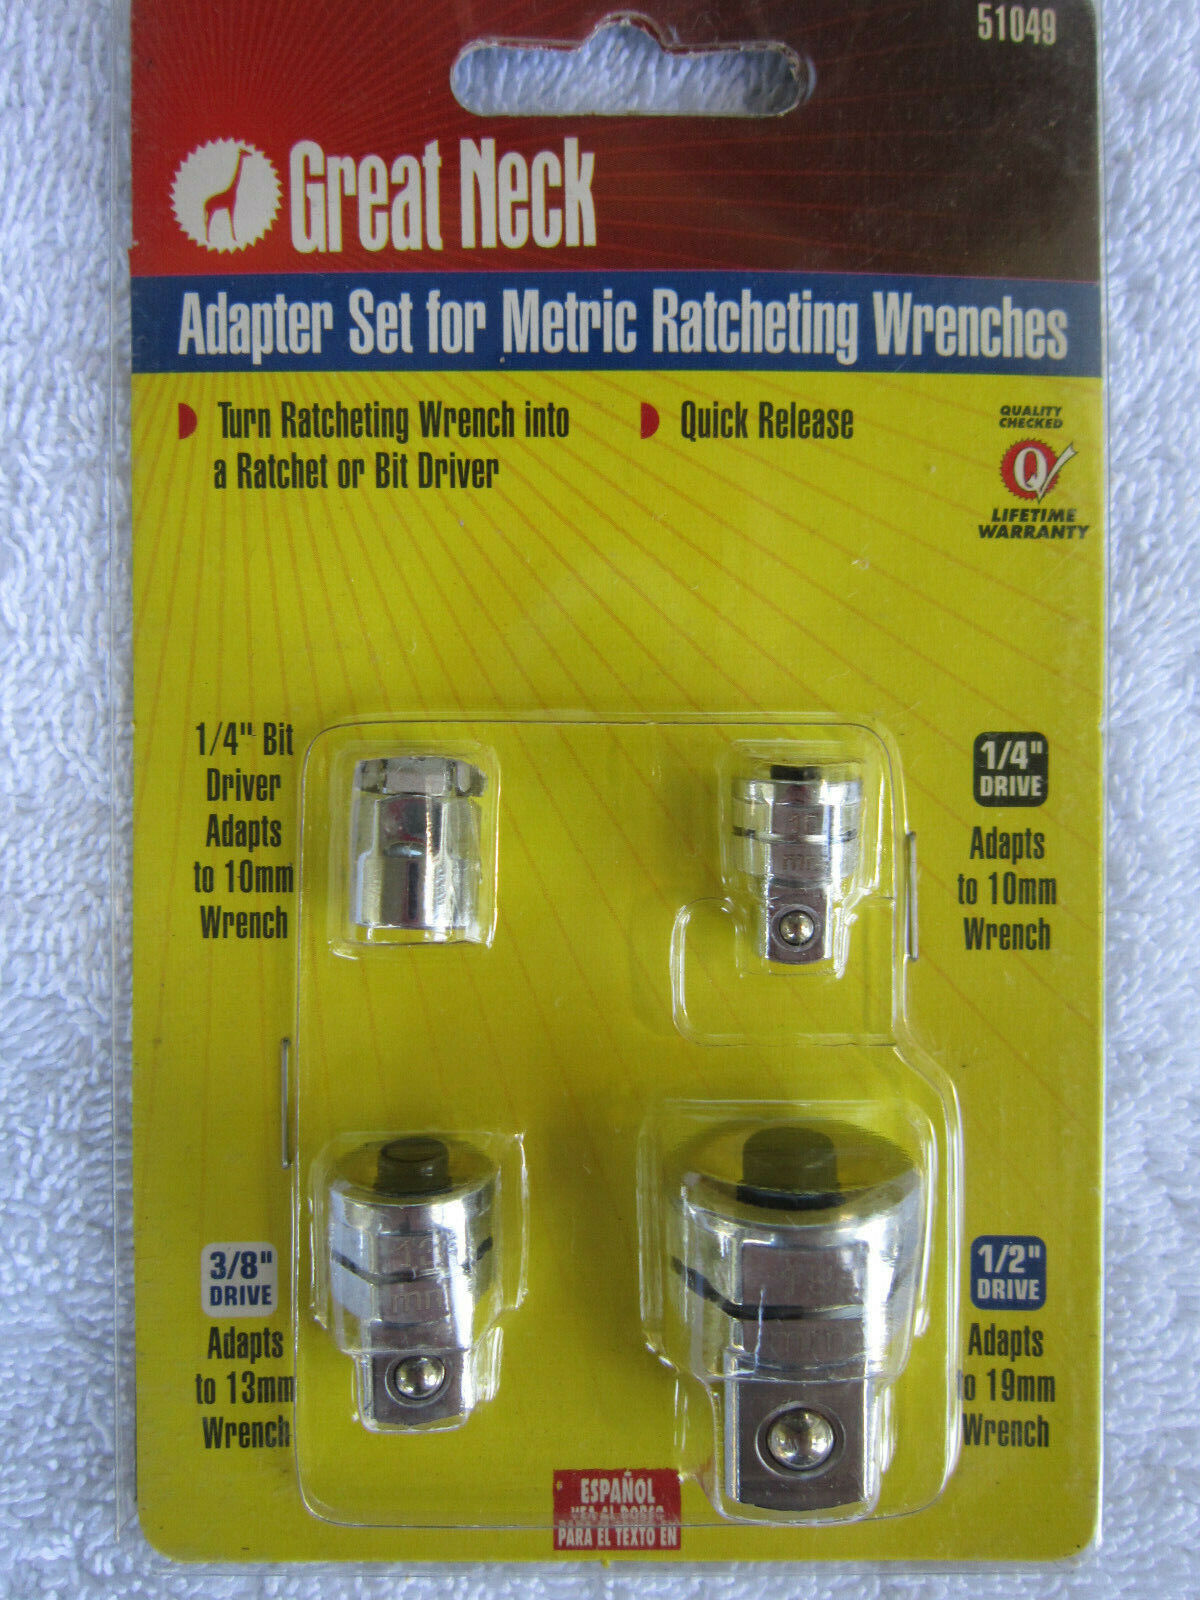 Great Neck - Adapter Set for (Metric) Ratcheting Wrenches (Part # 51049)